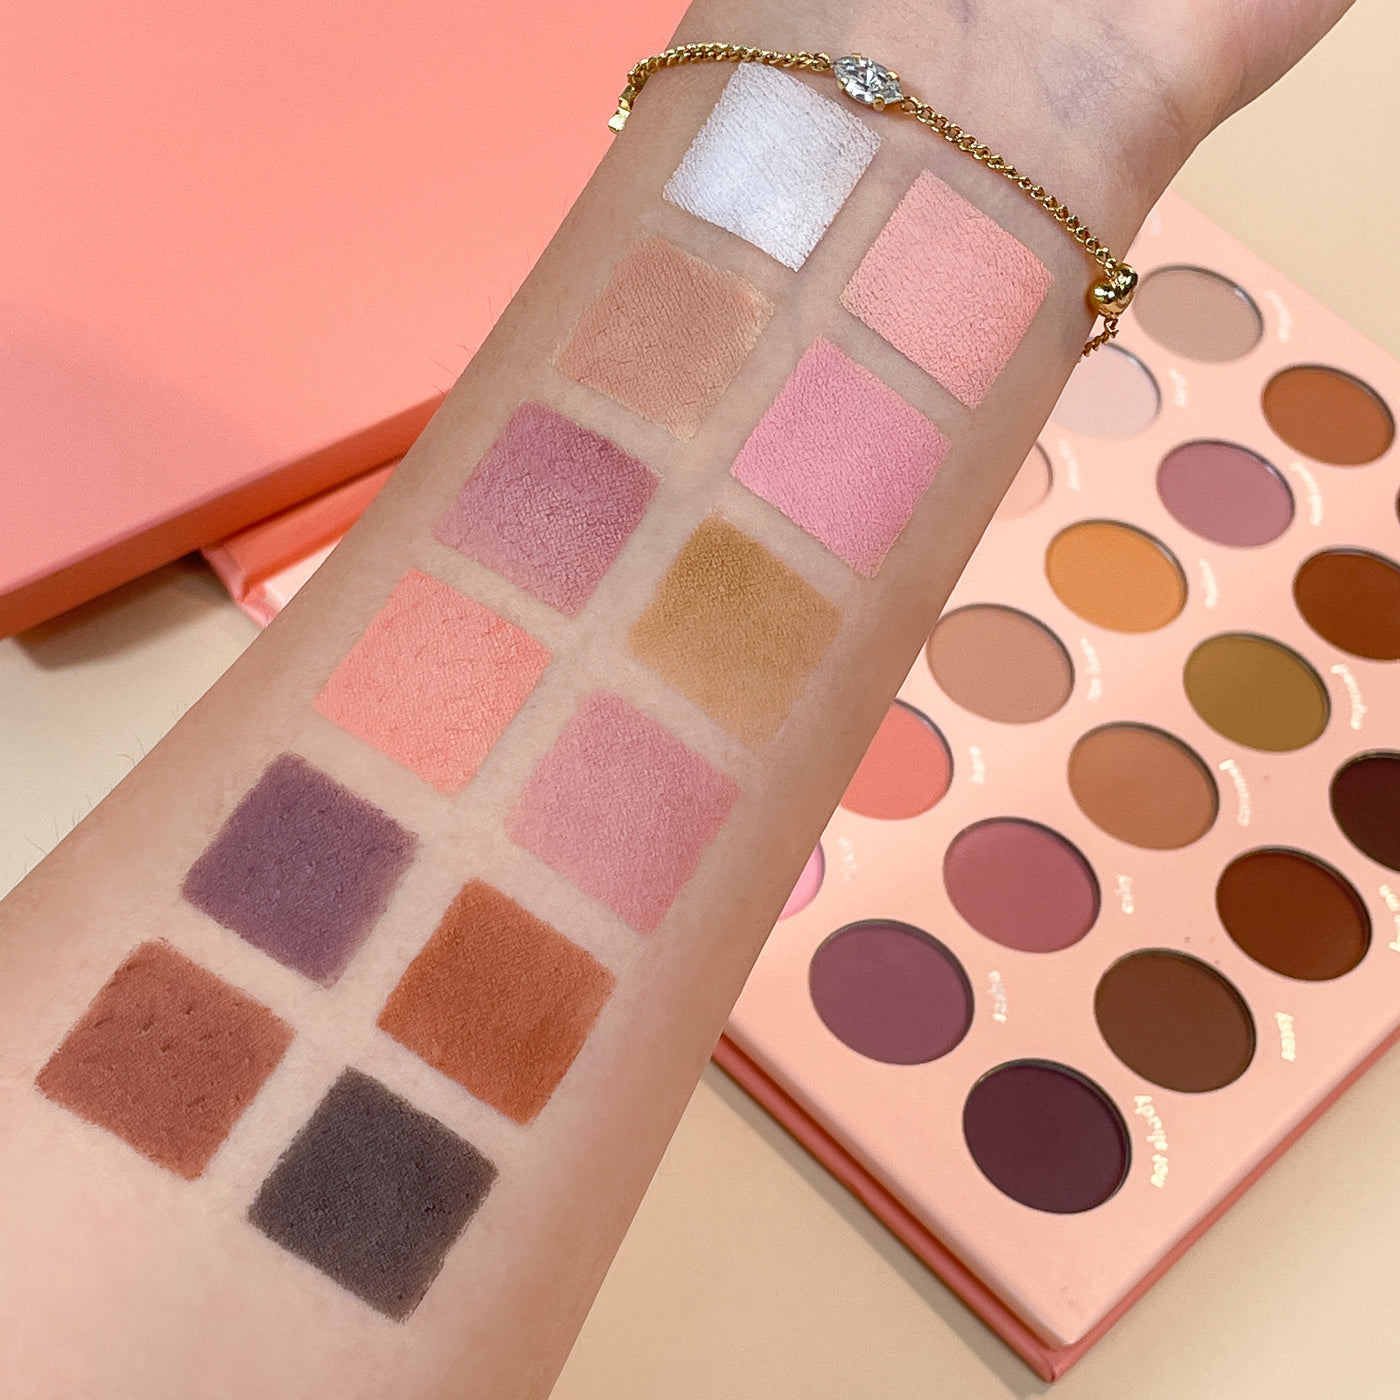 PRO25 SHADES OF ME Creative Beauty Palette